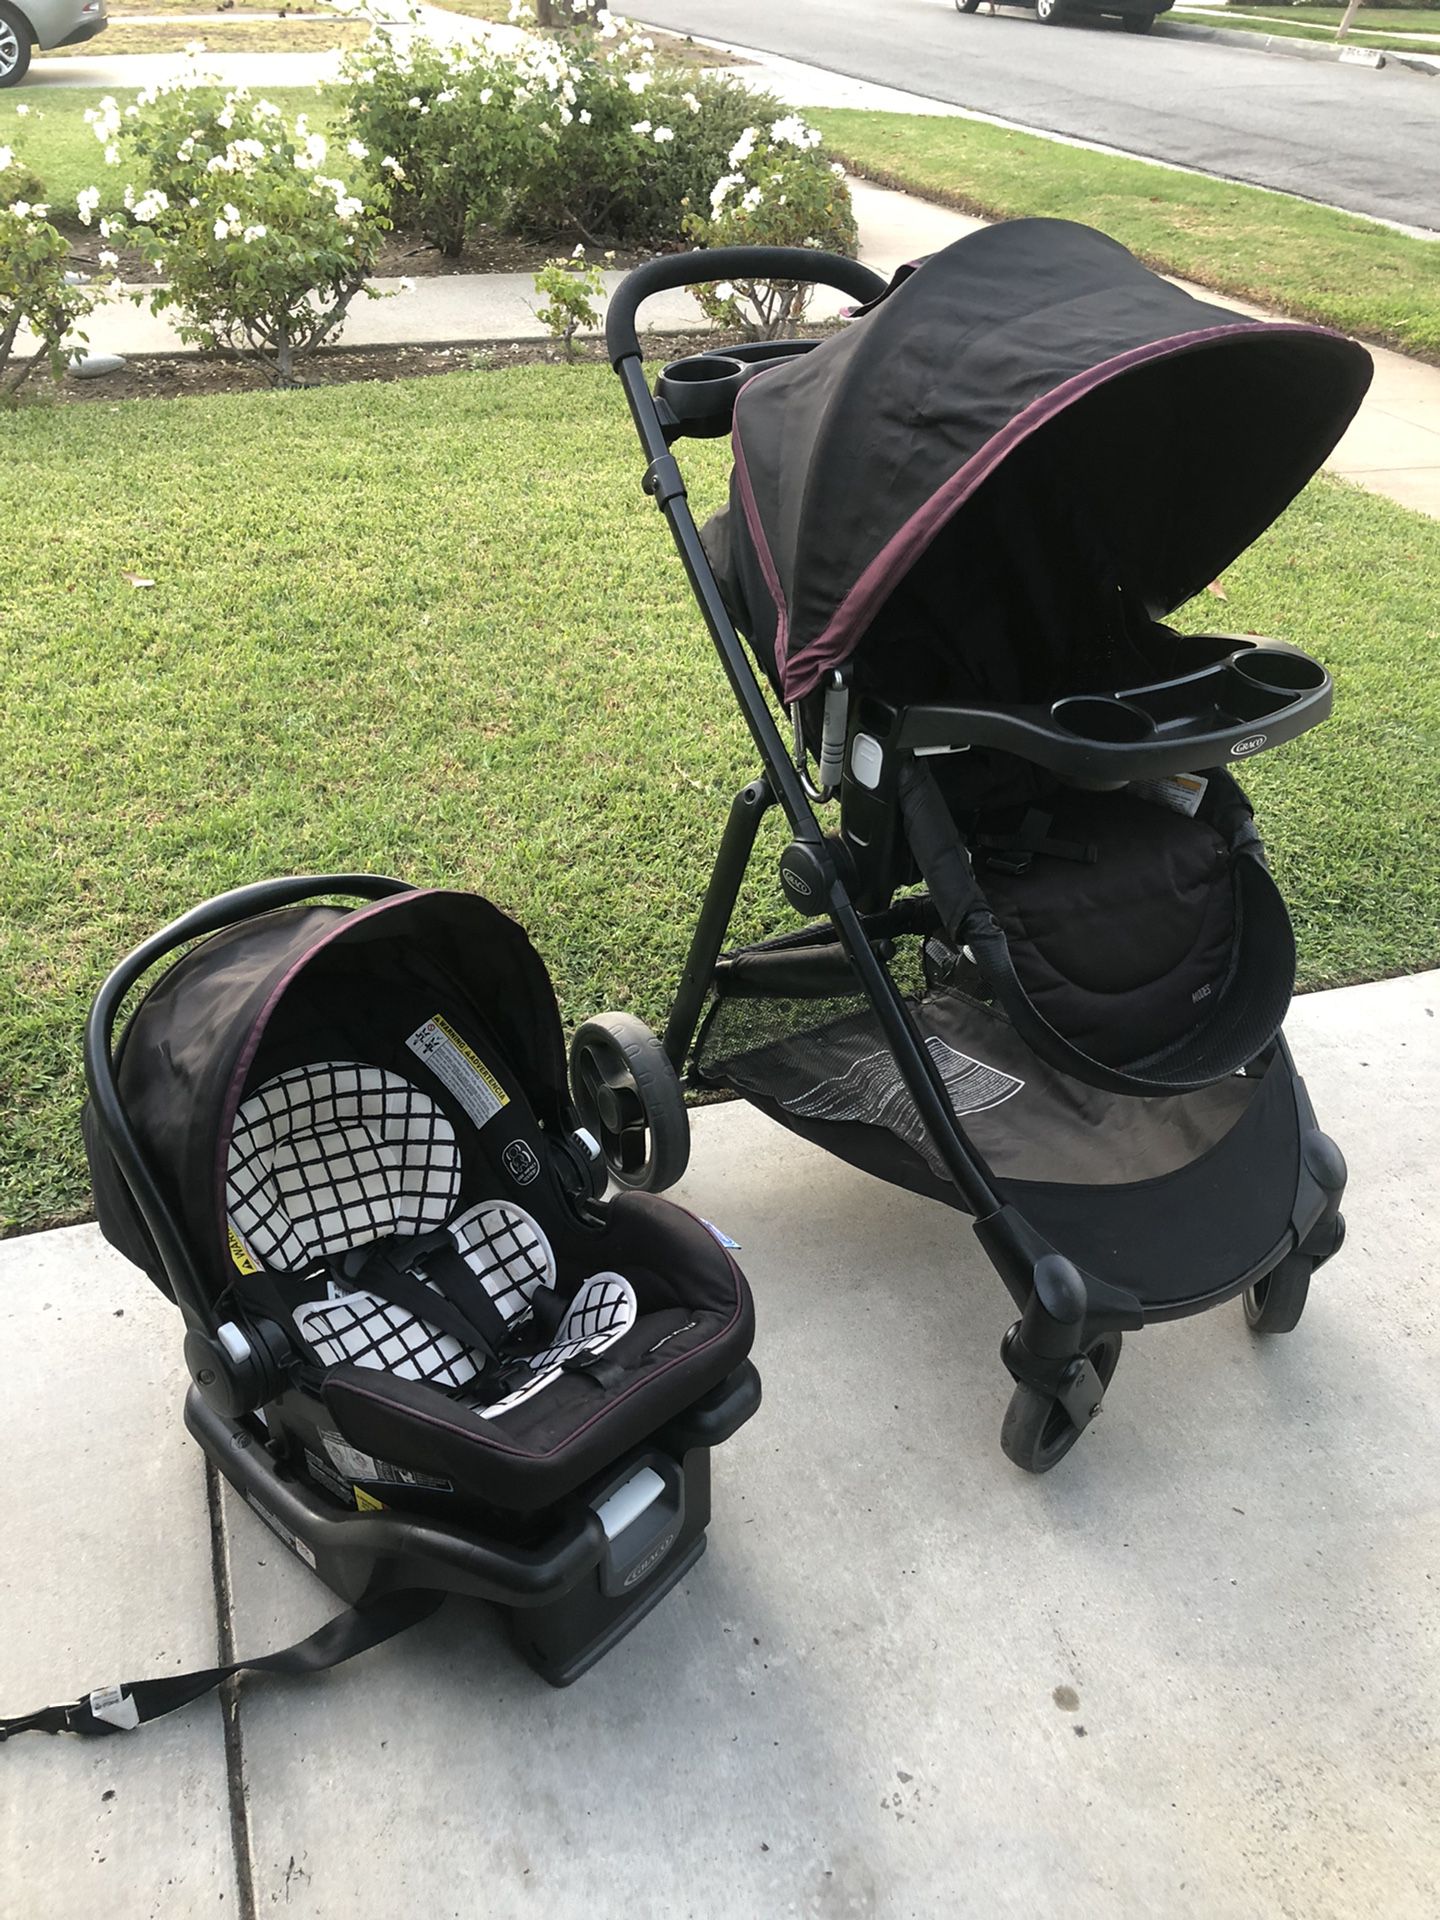 Girls Infant Car Seat And Stroller